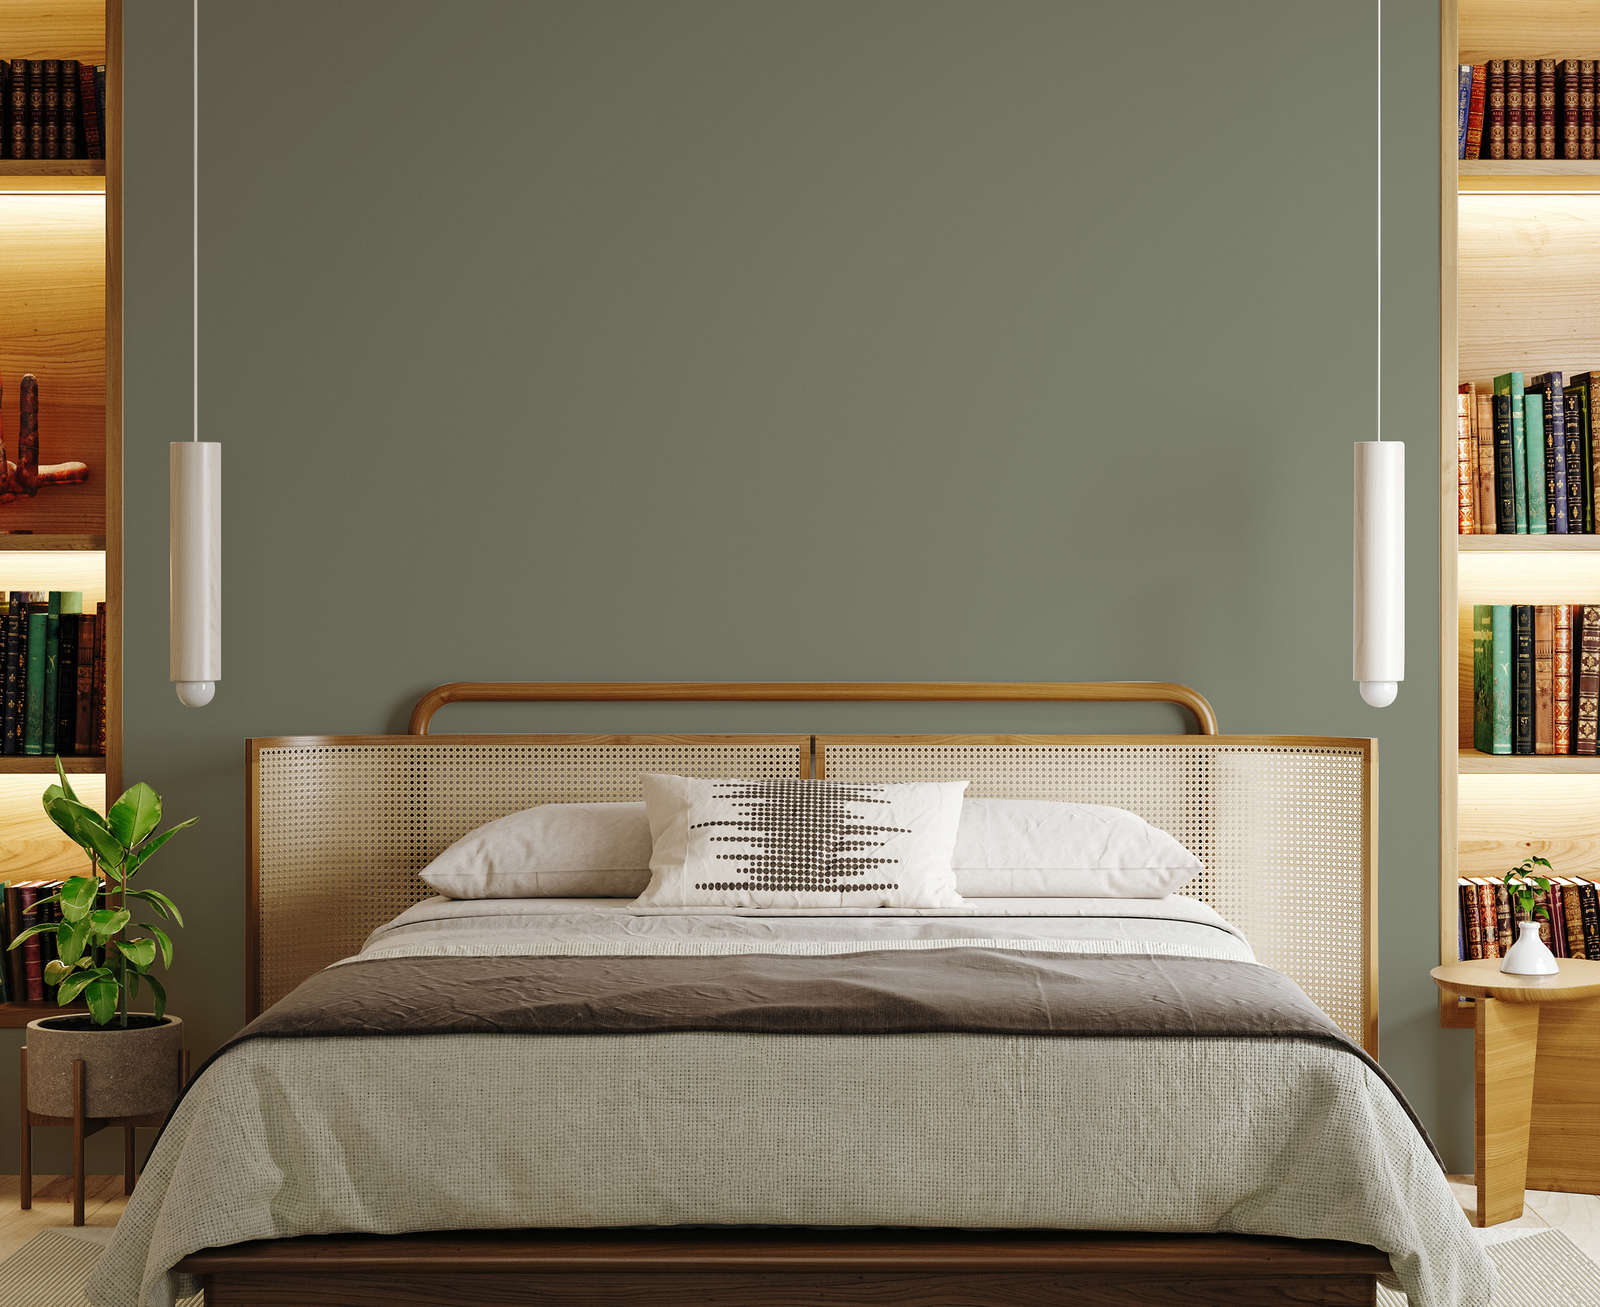             Premium Wall Paint Convincing Olive Green »Talented calm taupe« NW706 – 2.5 litre
        